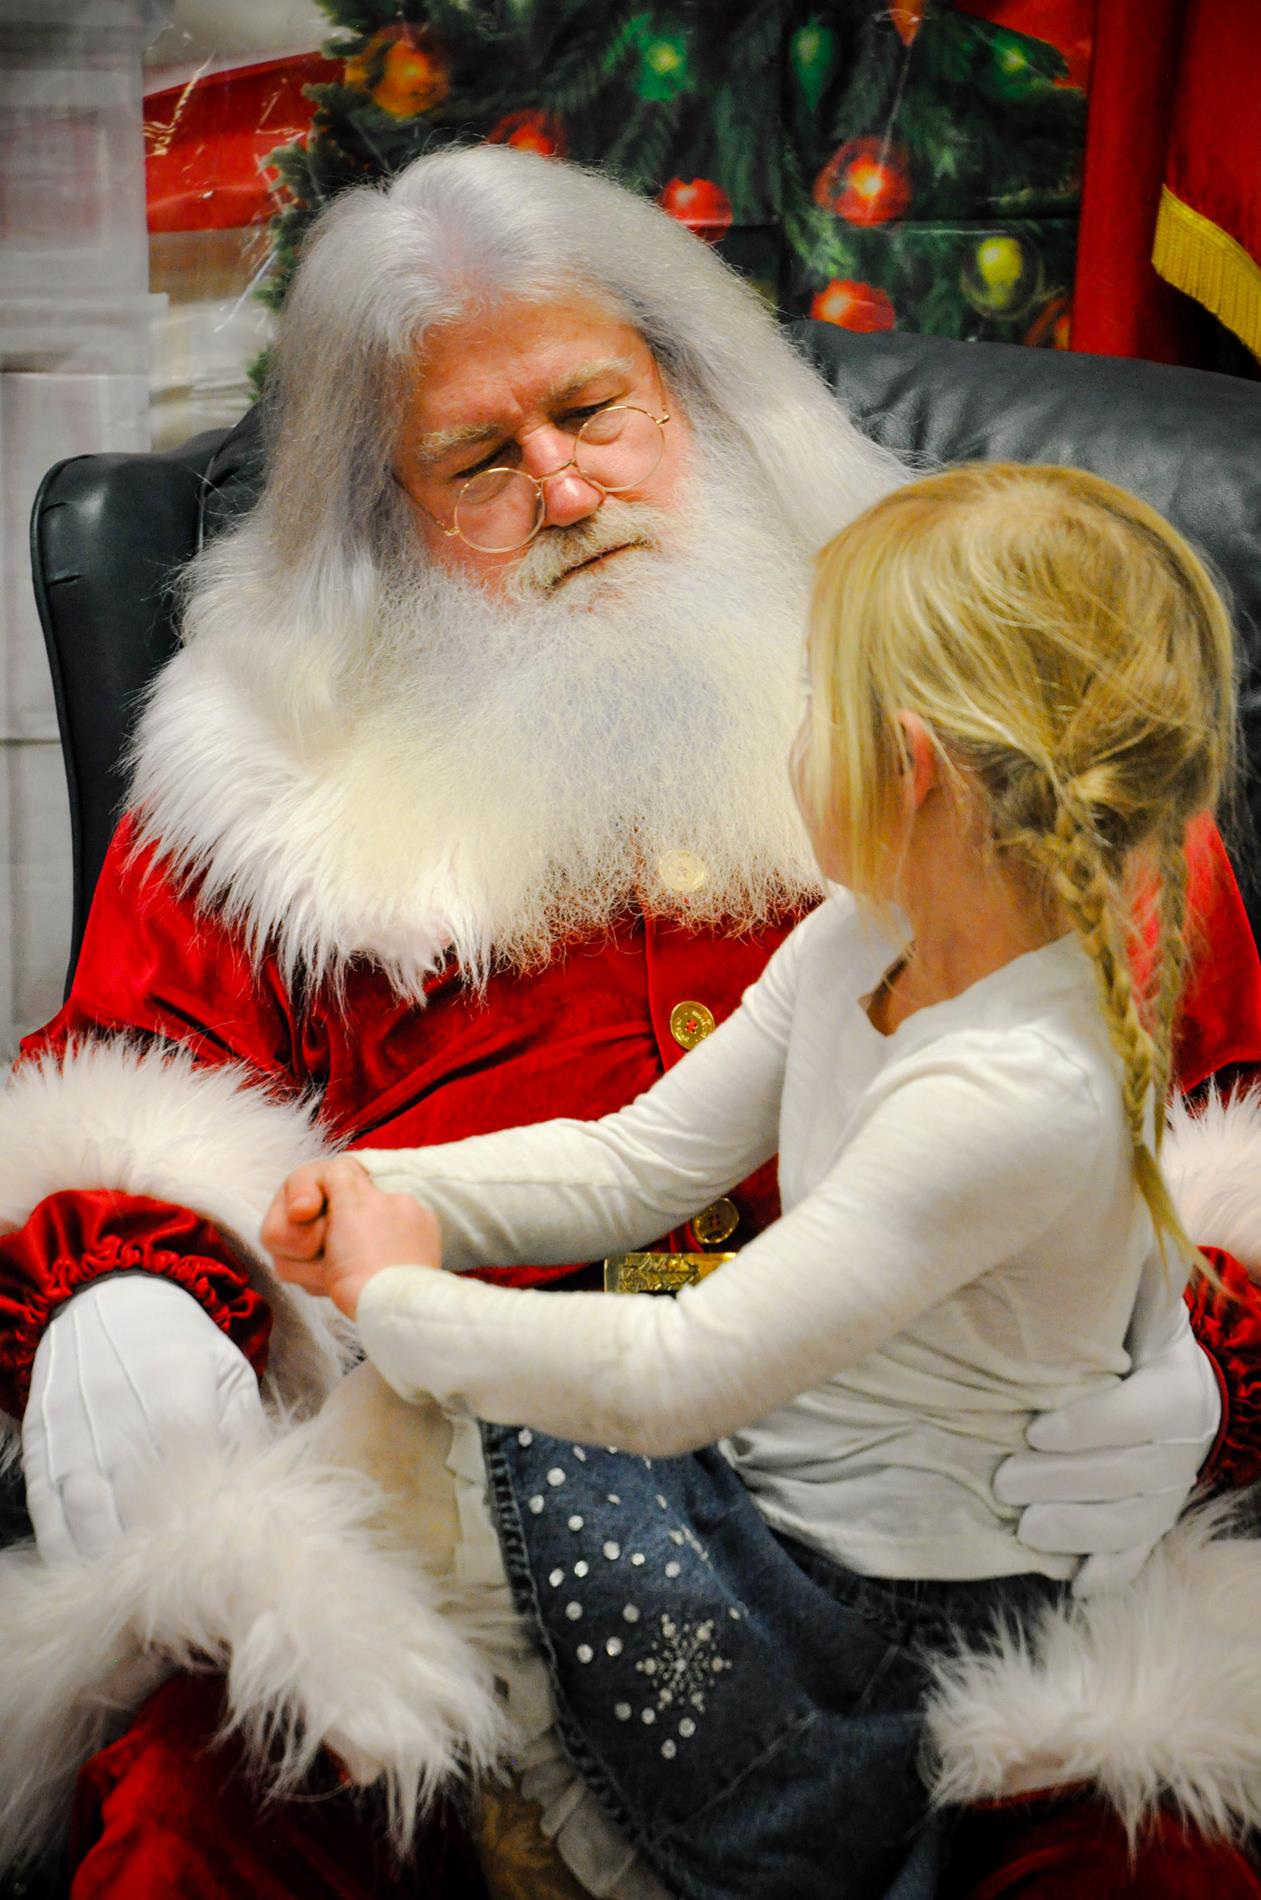 Santa really listens to little ones' wishes